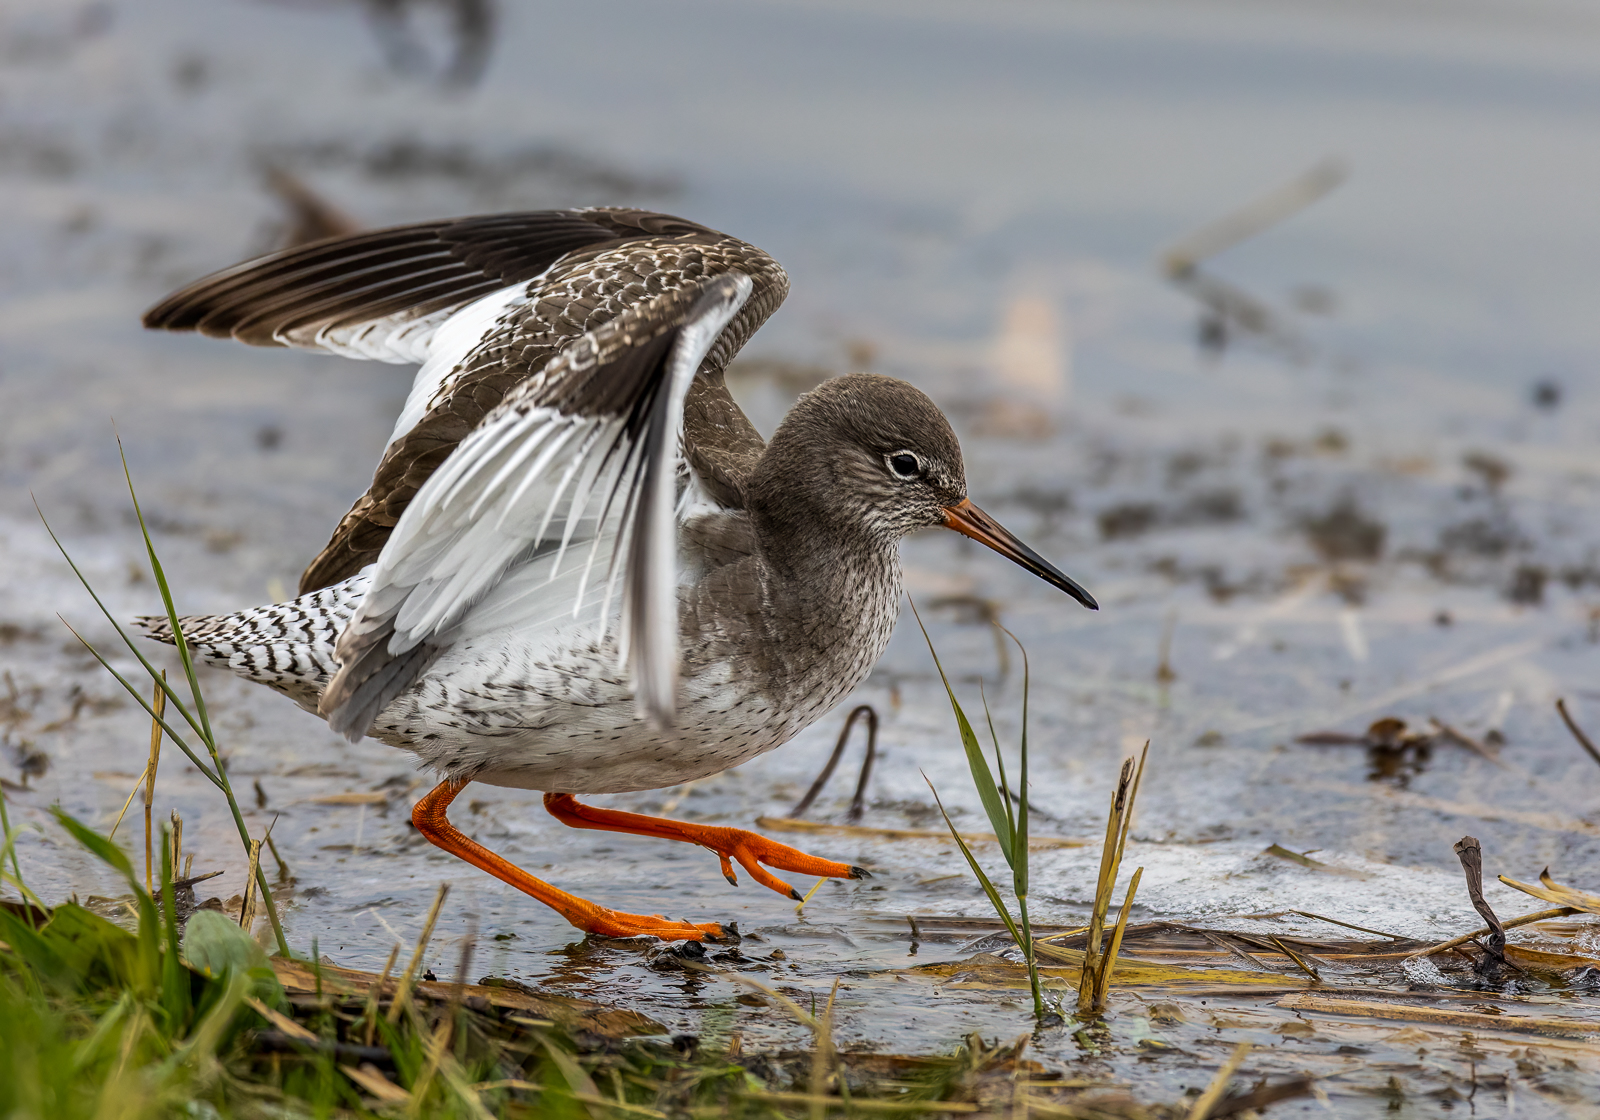 Redshank On Ice By Steve Parrish